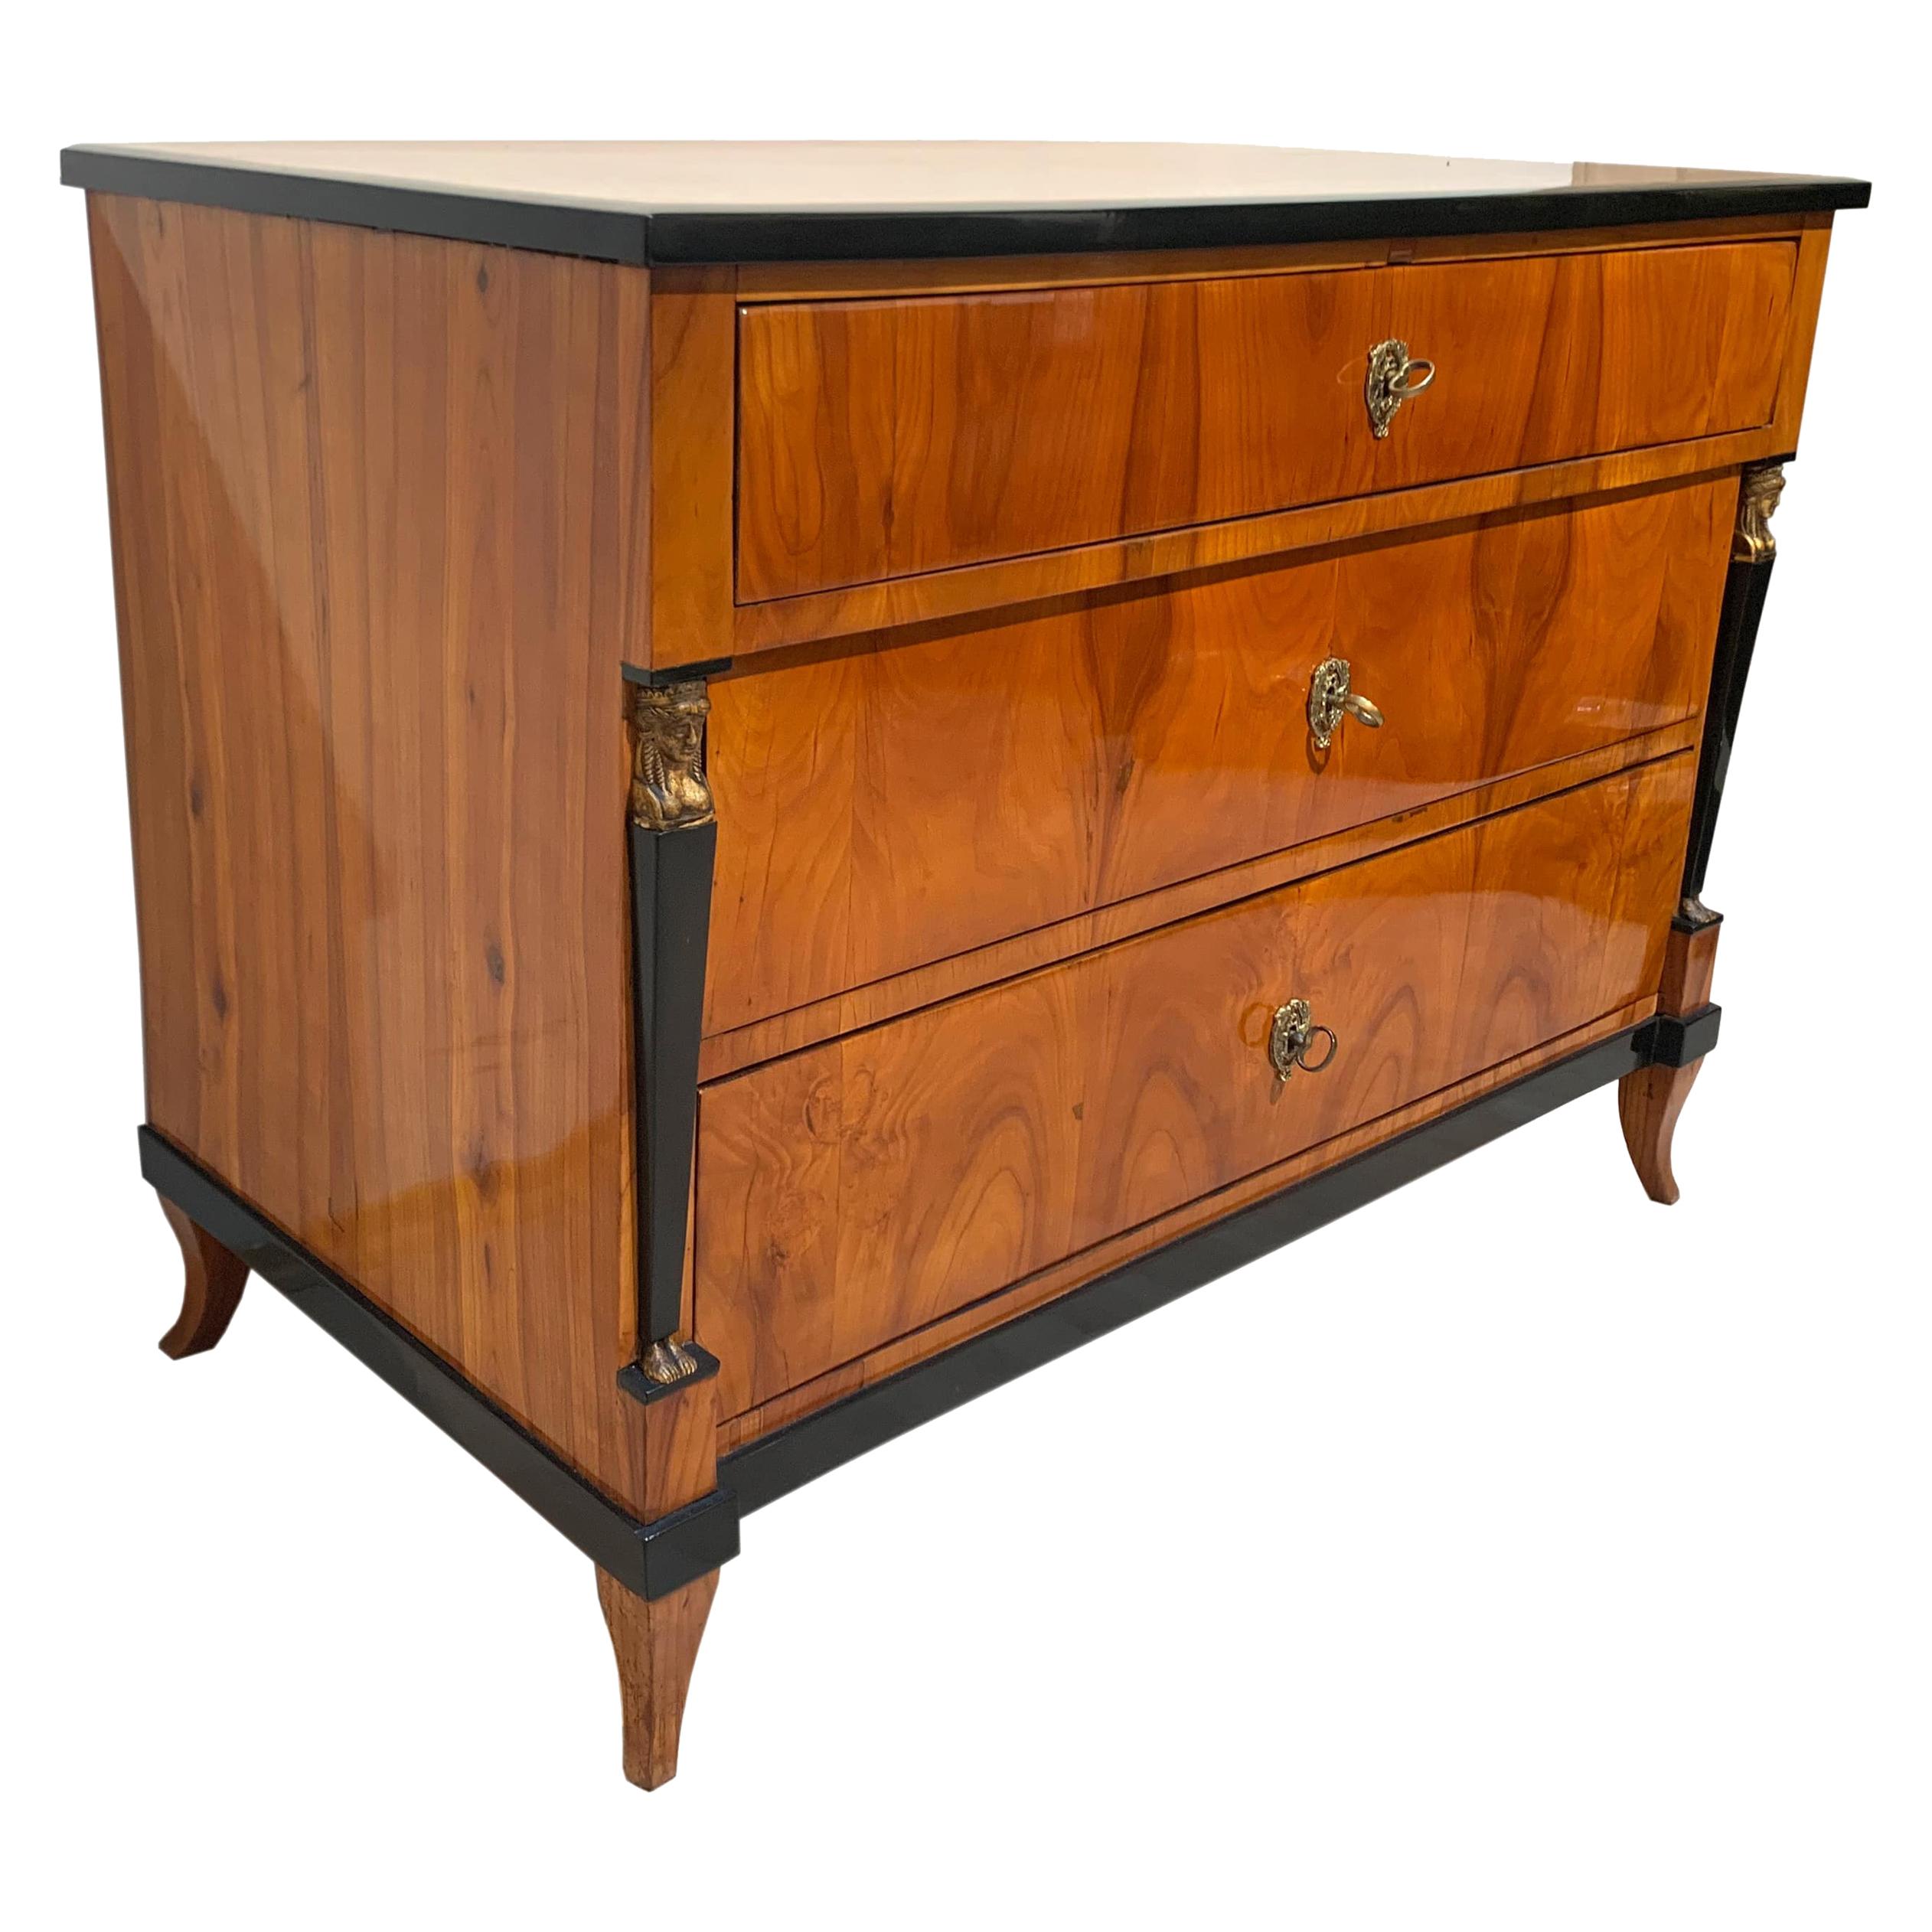 Very fine, original and greatly restored neoclassical Empire Commode / Chest of three Drawers with beautiful caryatids from South Germany, circa 1810-1815.
Wonderful, bright and friendly cherry veneer and solid wood, book-matched and running over